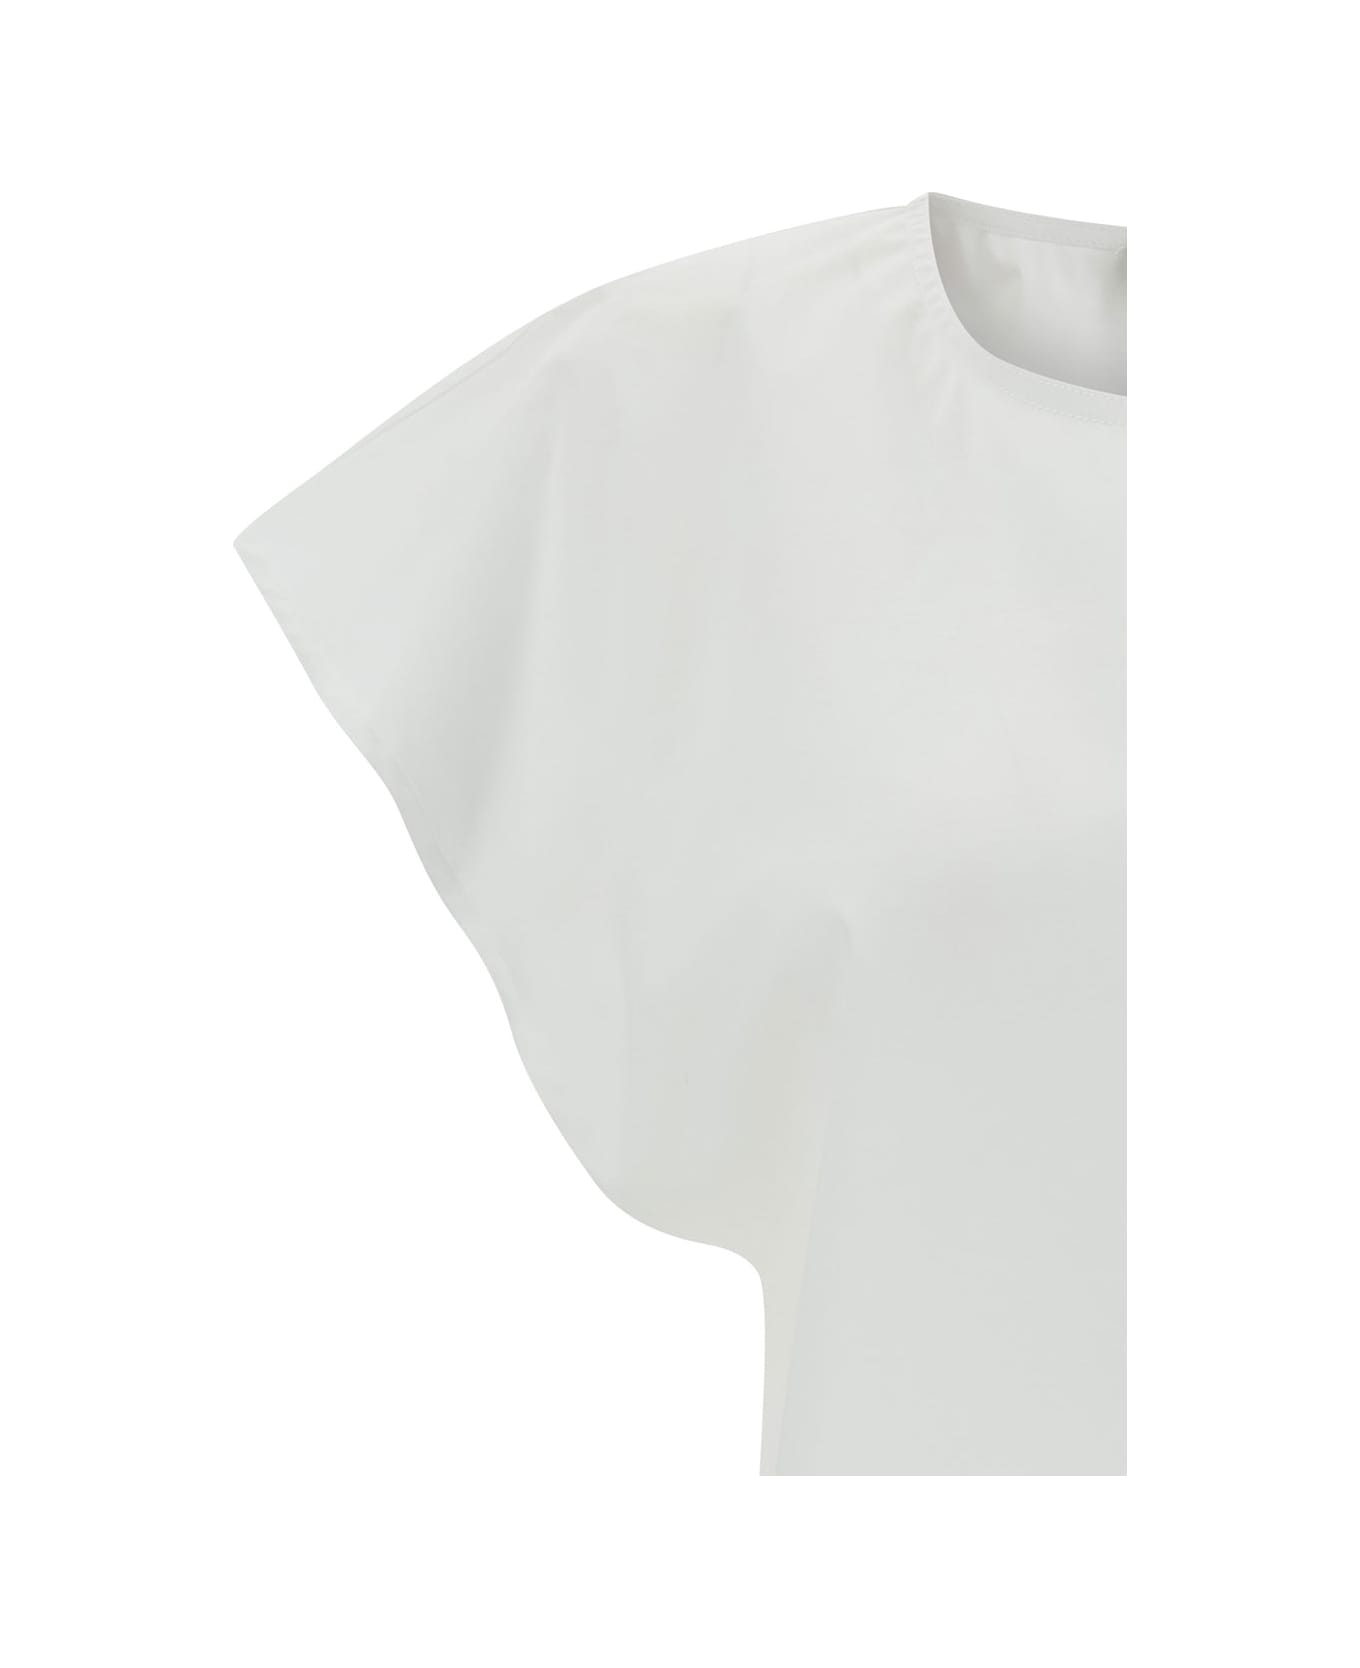 Federica Tosi White Top With Cap Sleeves In Stretch Cotton Woman - White トップス